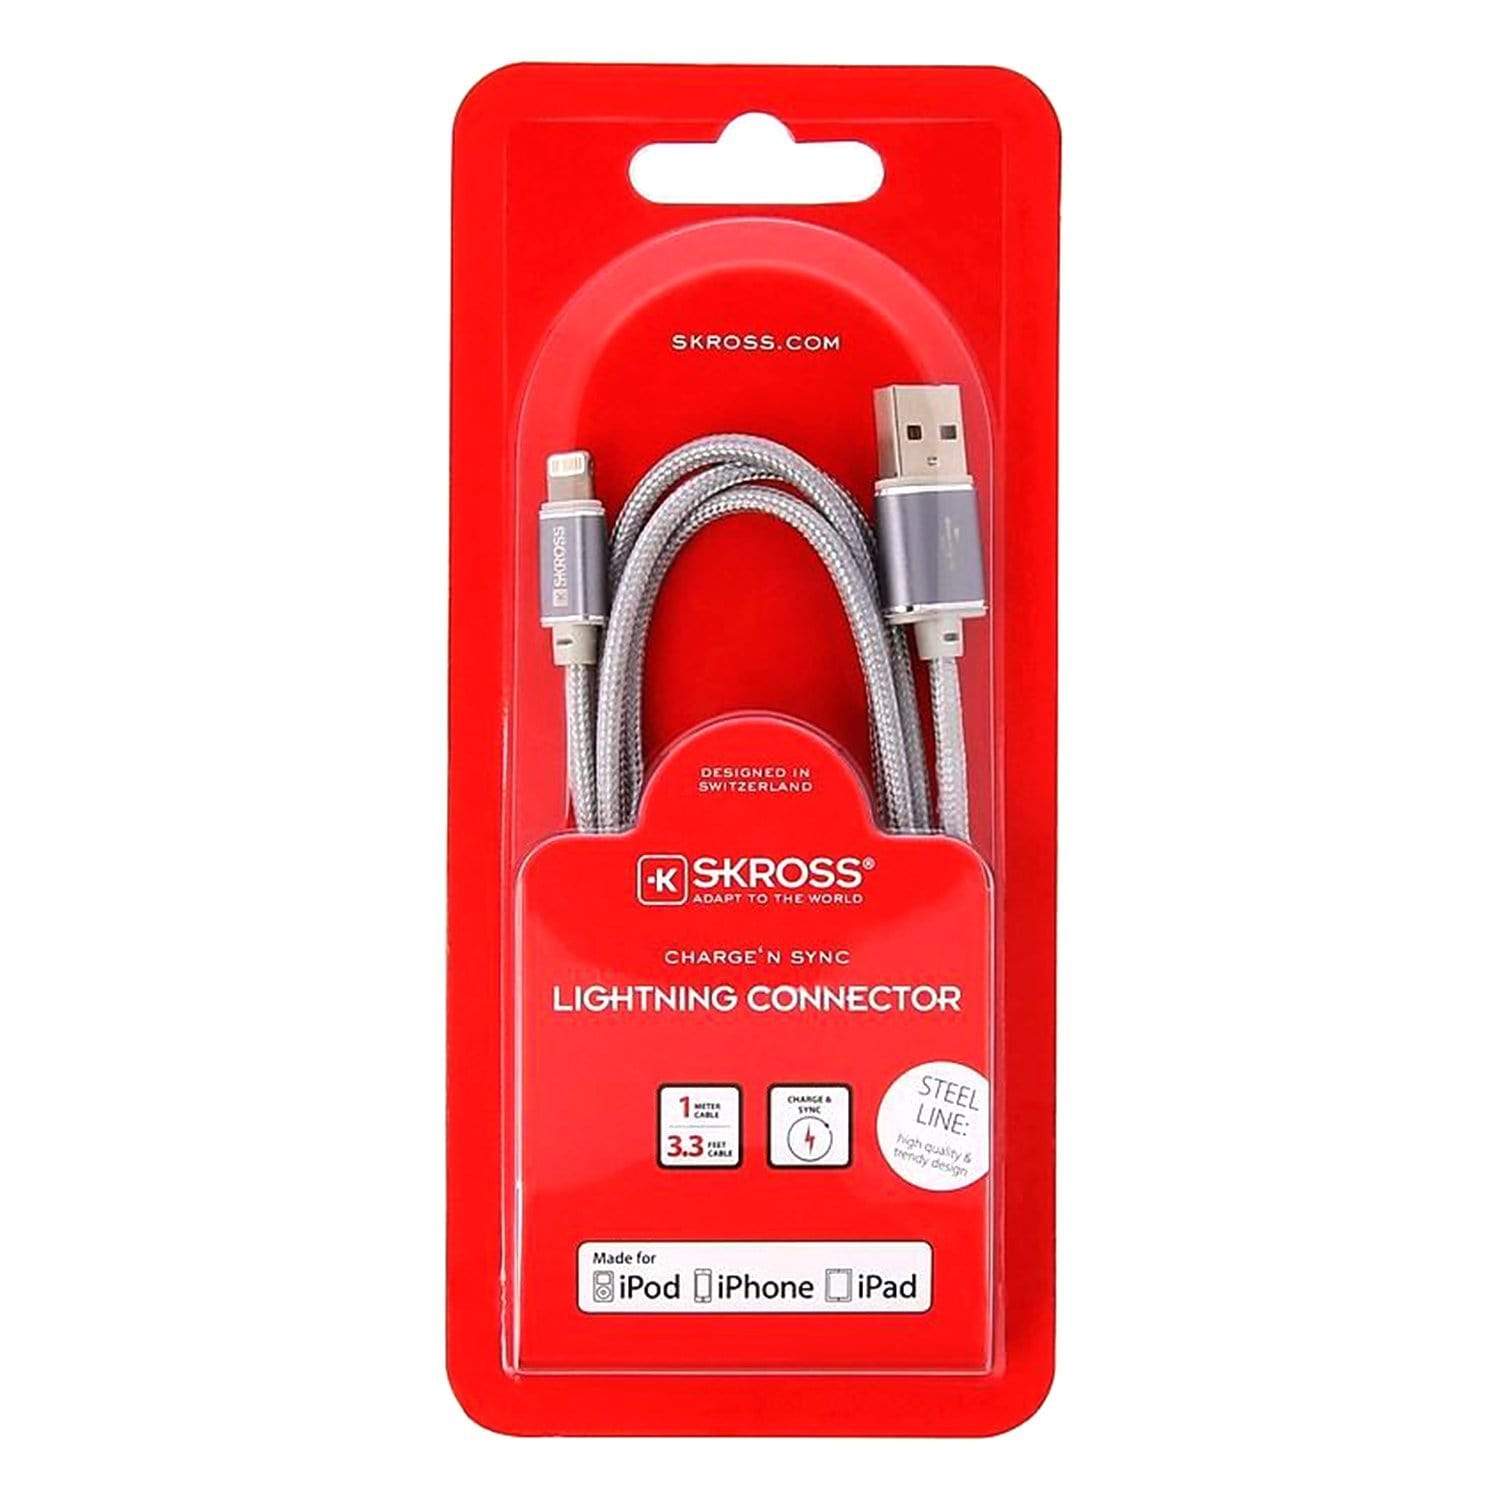 Skross Steel Line Charge N Sync Lightning Connector Cable - Silver - 2700242 - Jashanmal Home